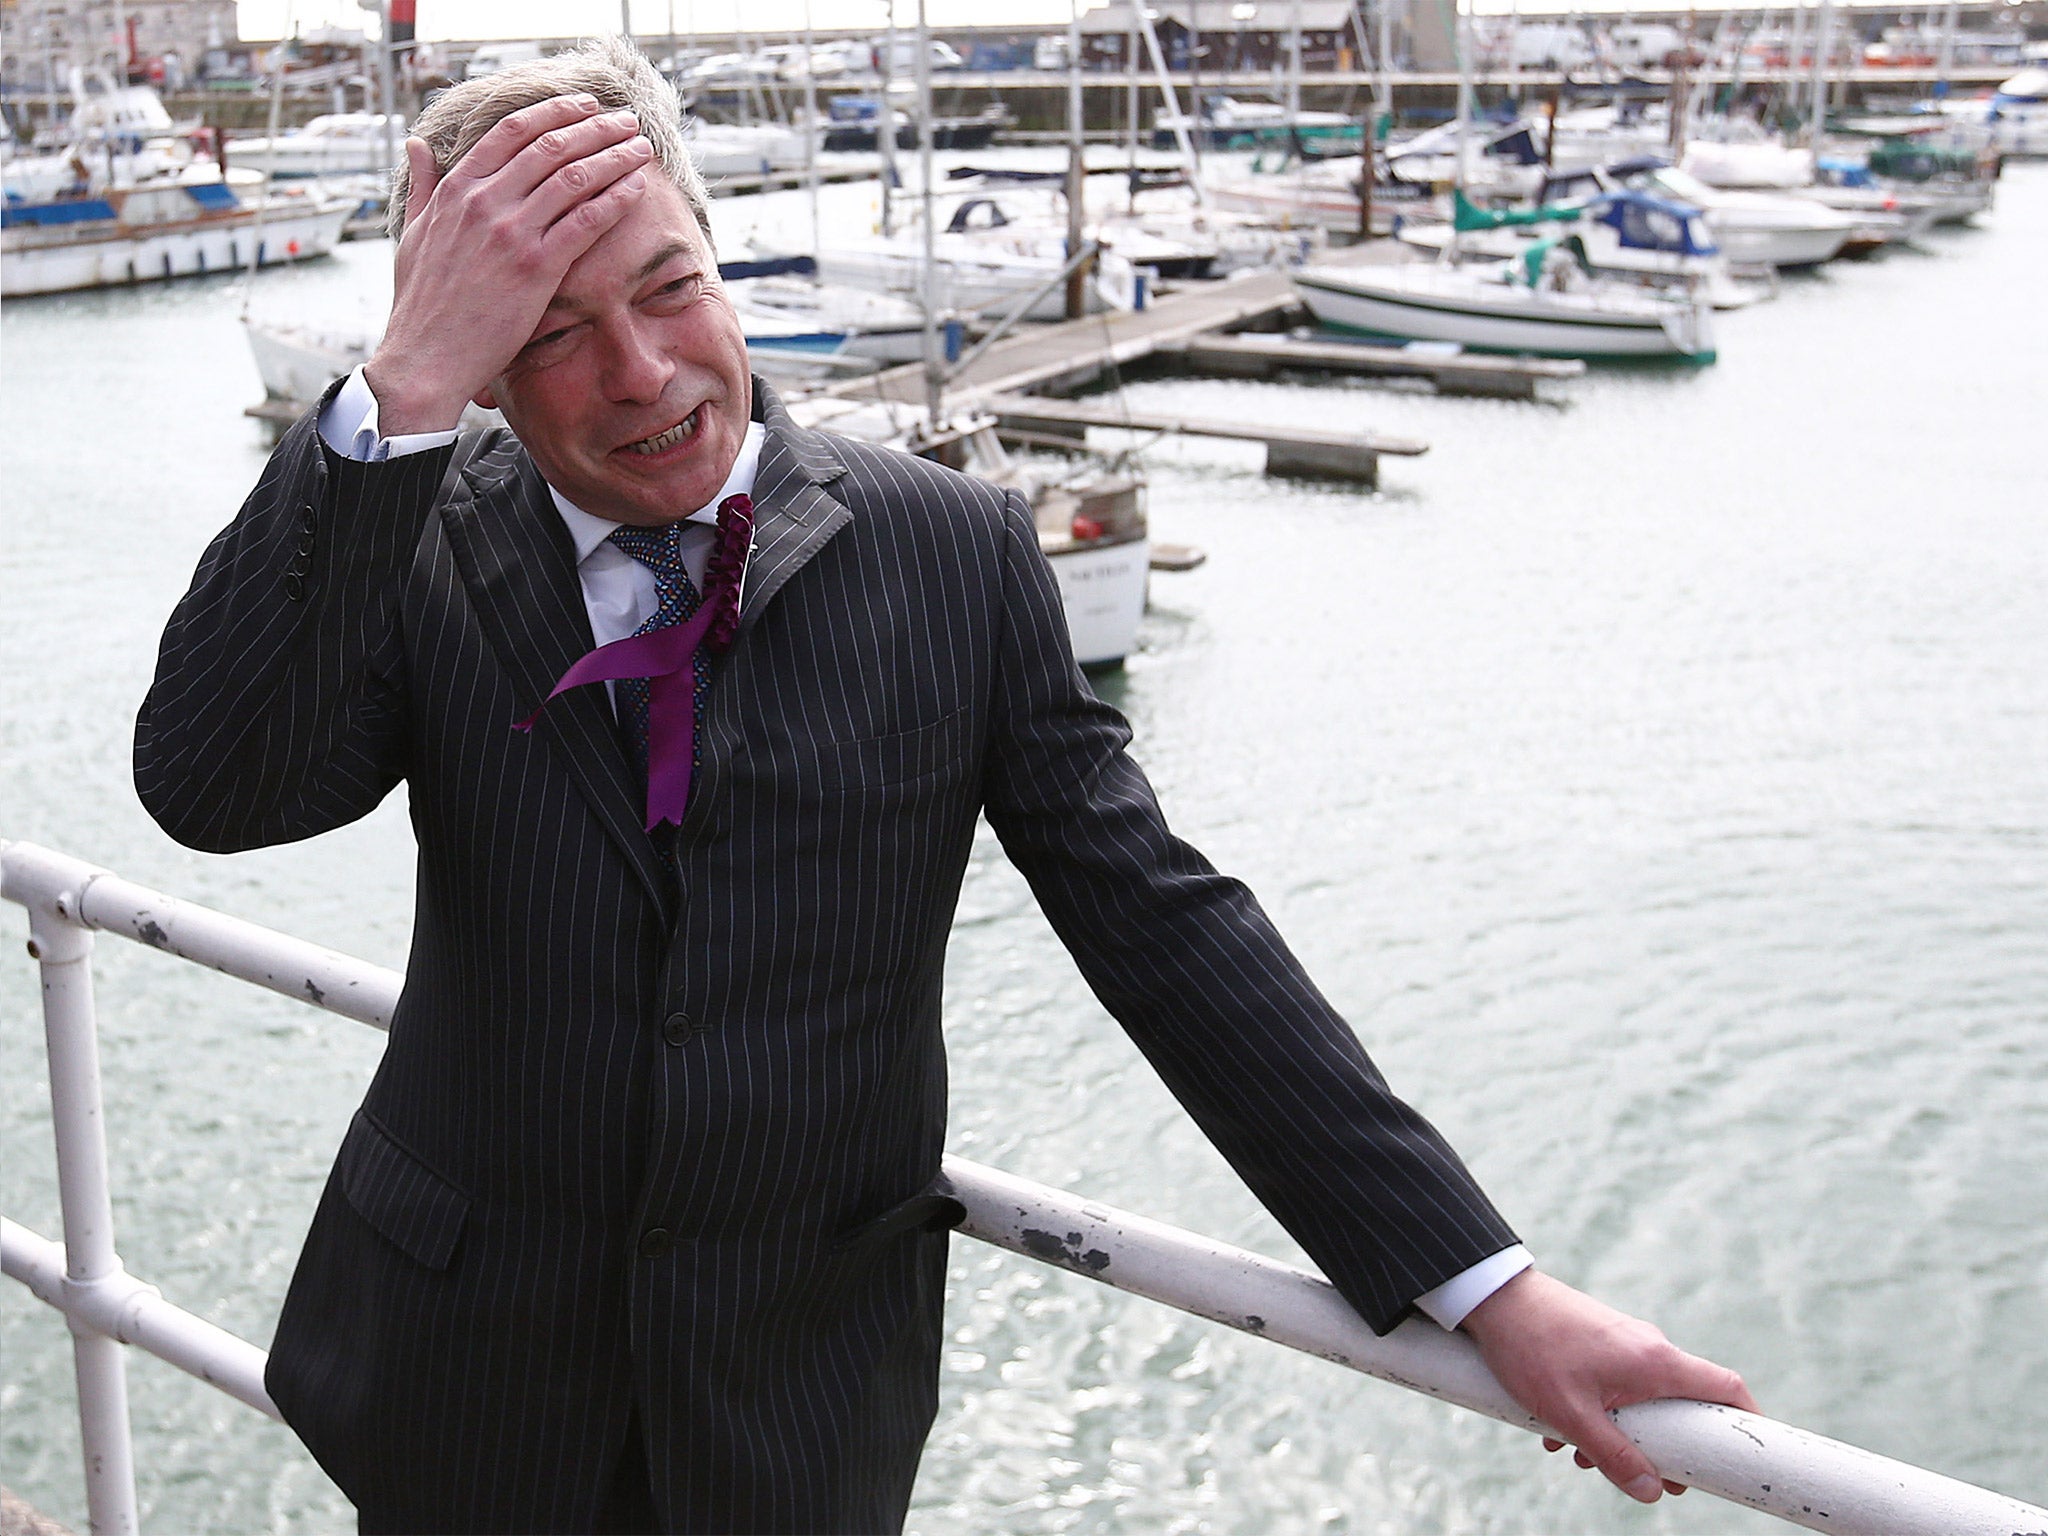 Farage has been accused of homophobia after a video shows him making a joke about 'fags' during a best man's speech